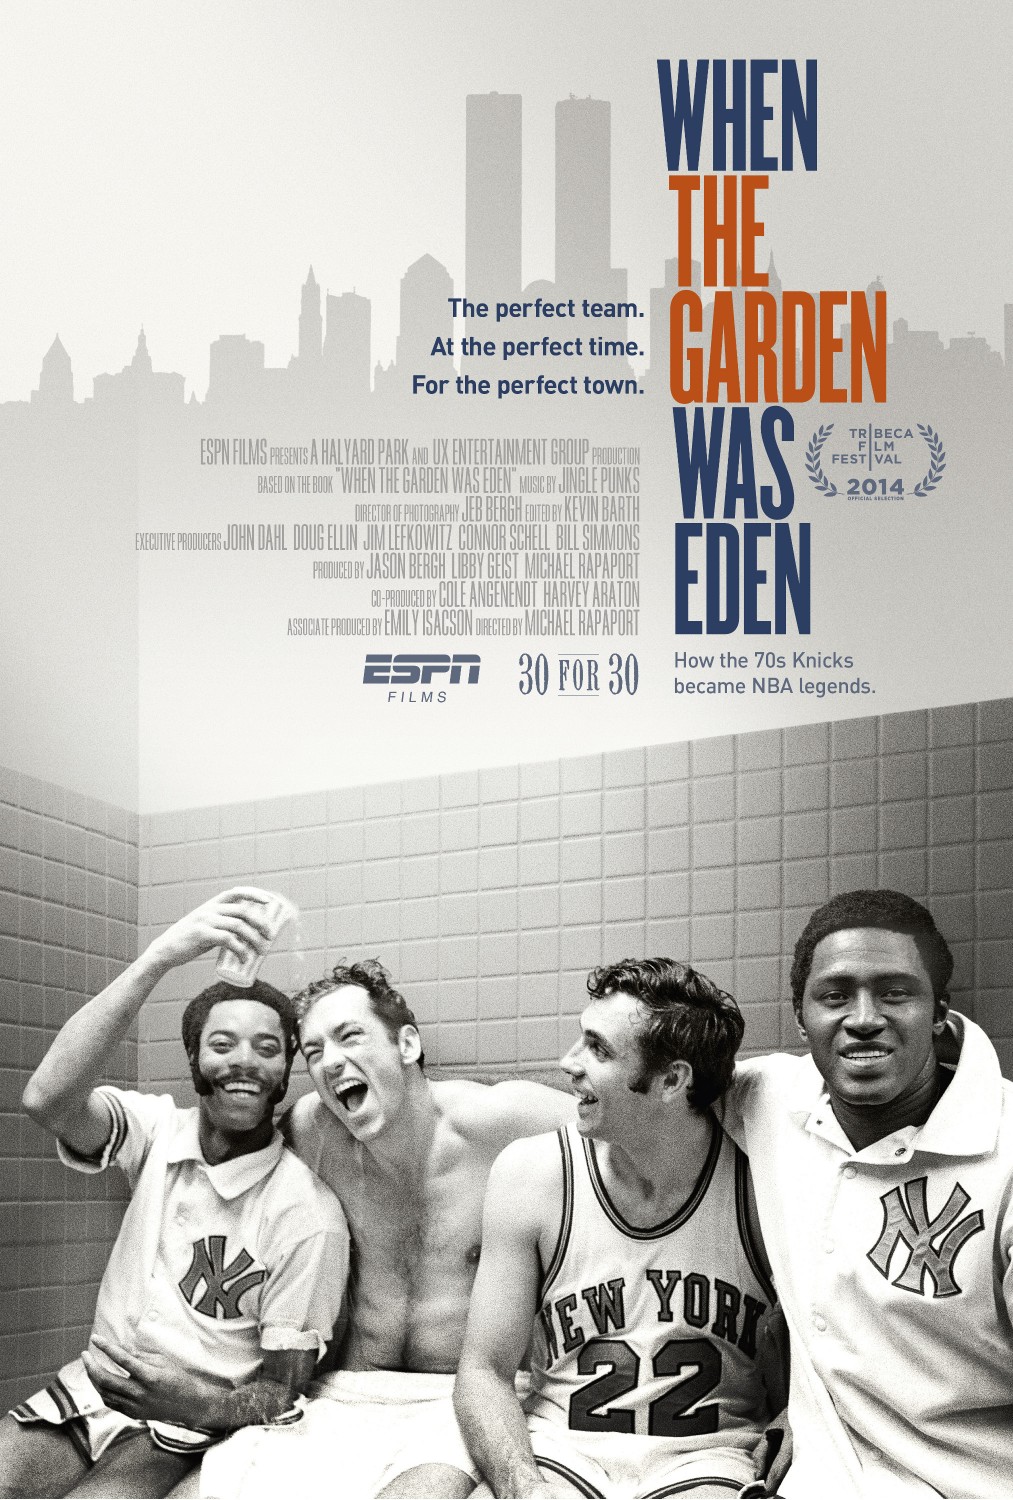 Extra Large Movie Poster Image for When the Garden Was Eden 